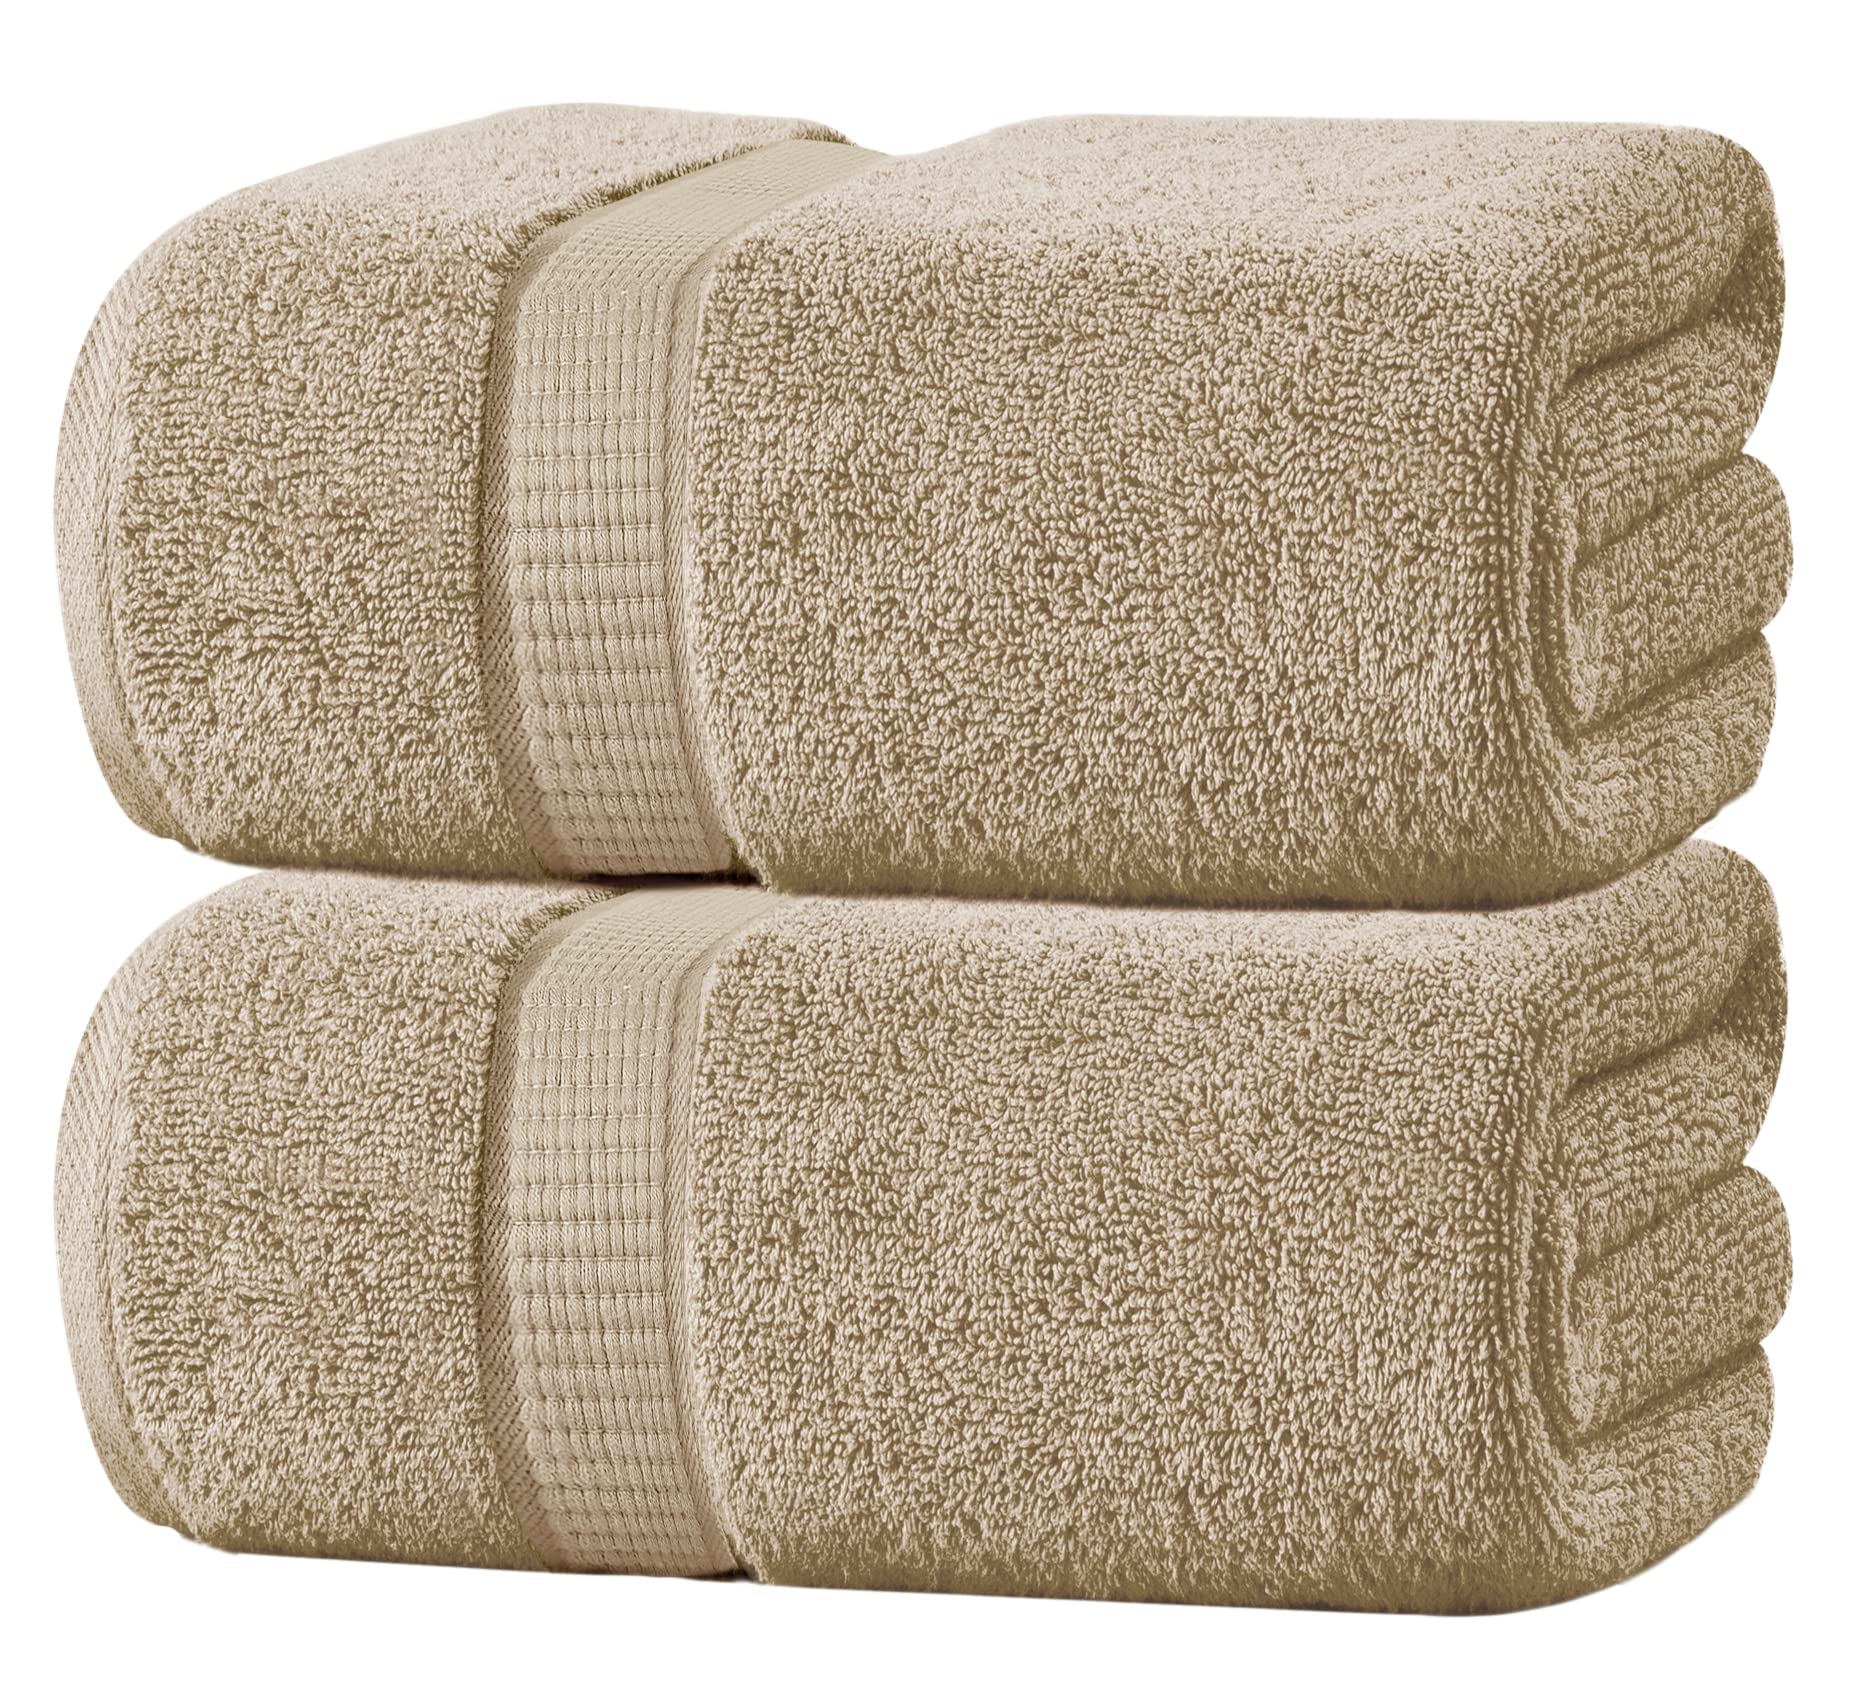 Oakias 2 Pack Luxury Bath Sheets Beige 35 x 70 Inches Highly Absorbent &  Soft 600